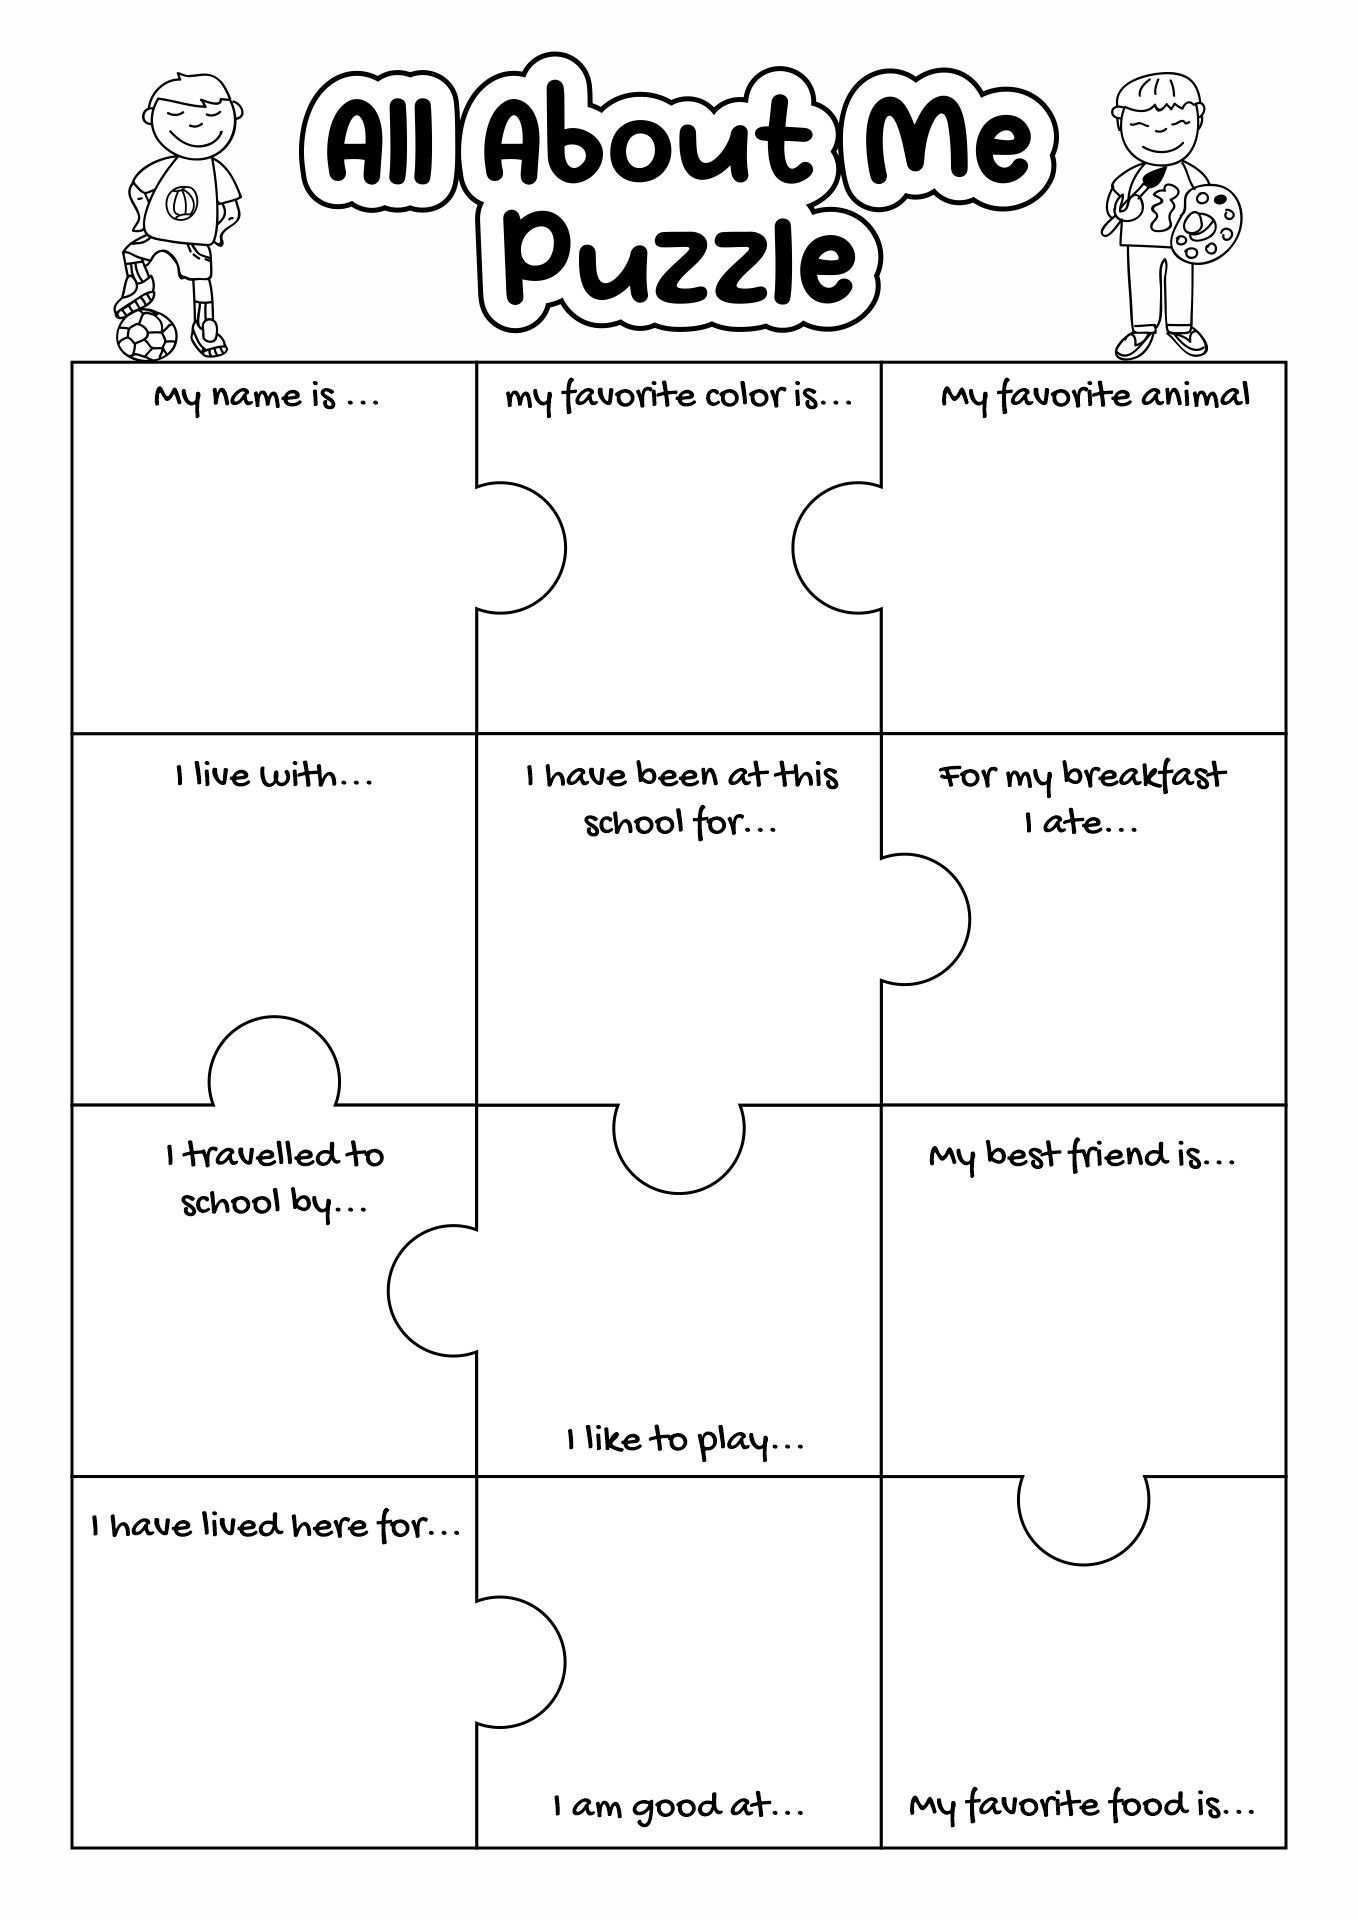 All About Me Puzzle First Days of School